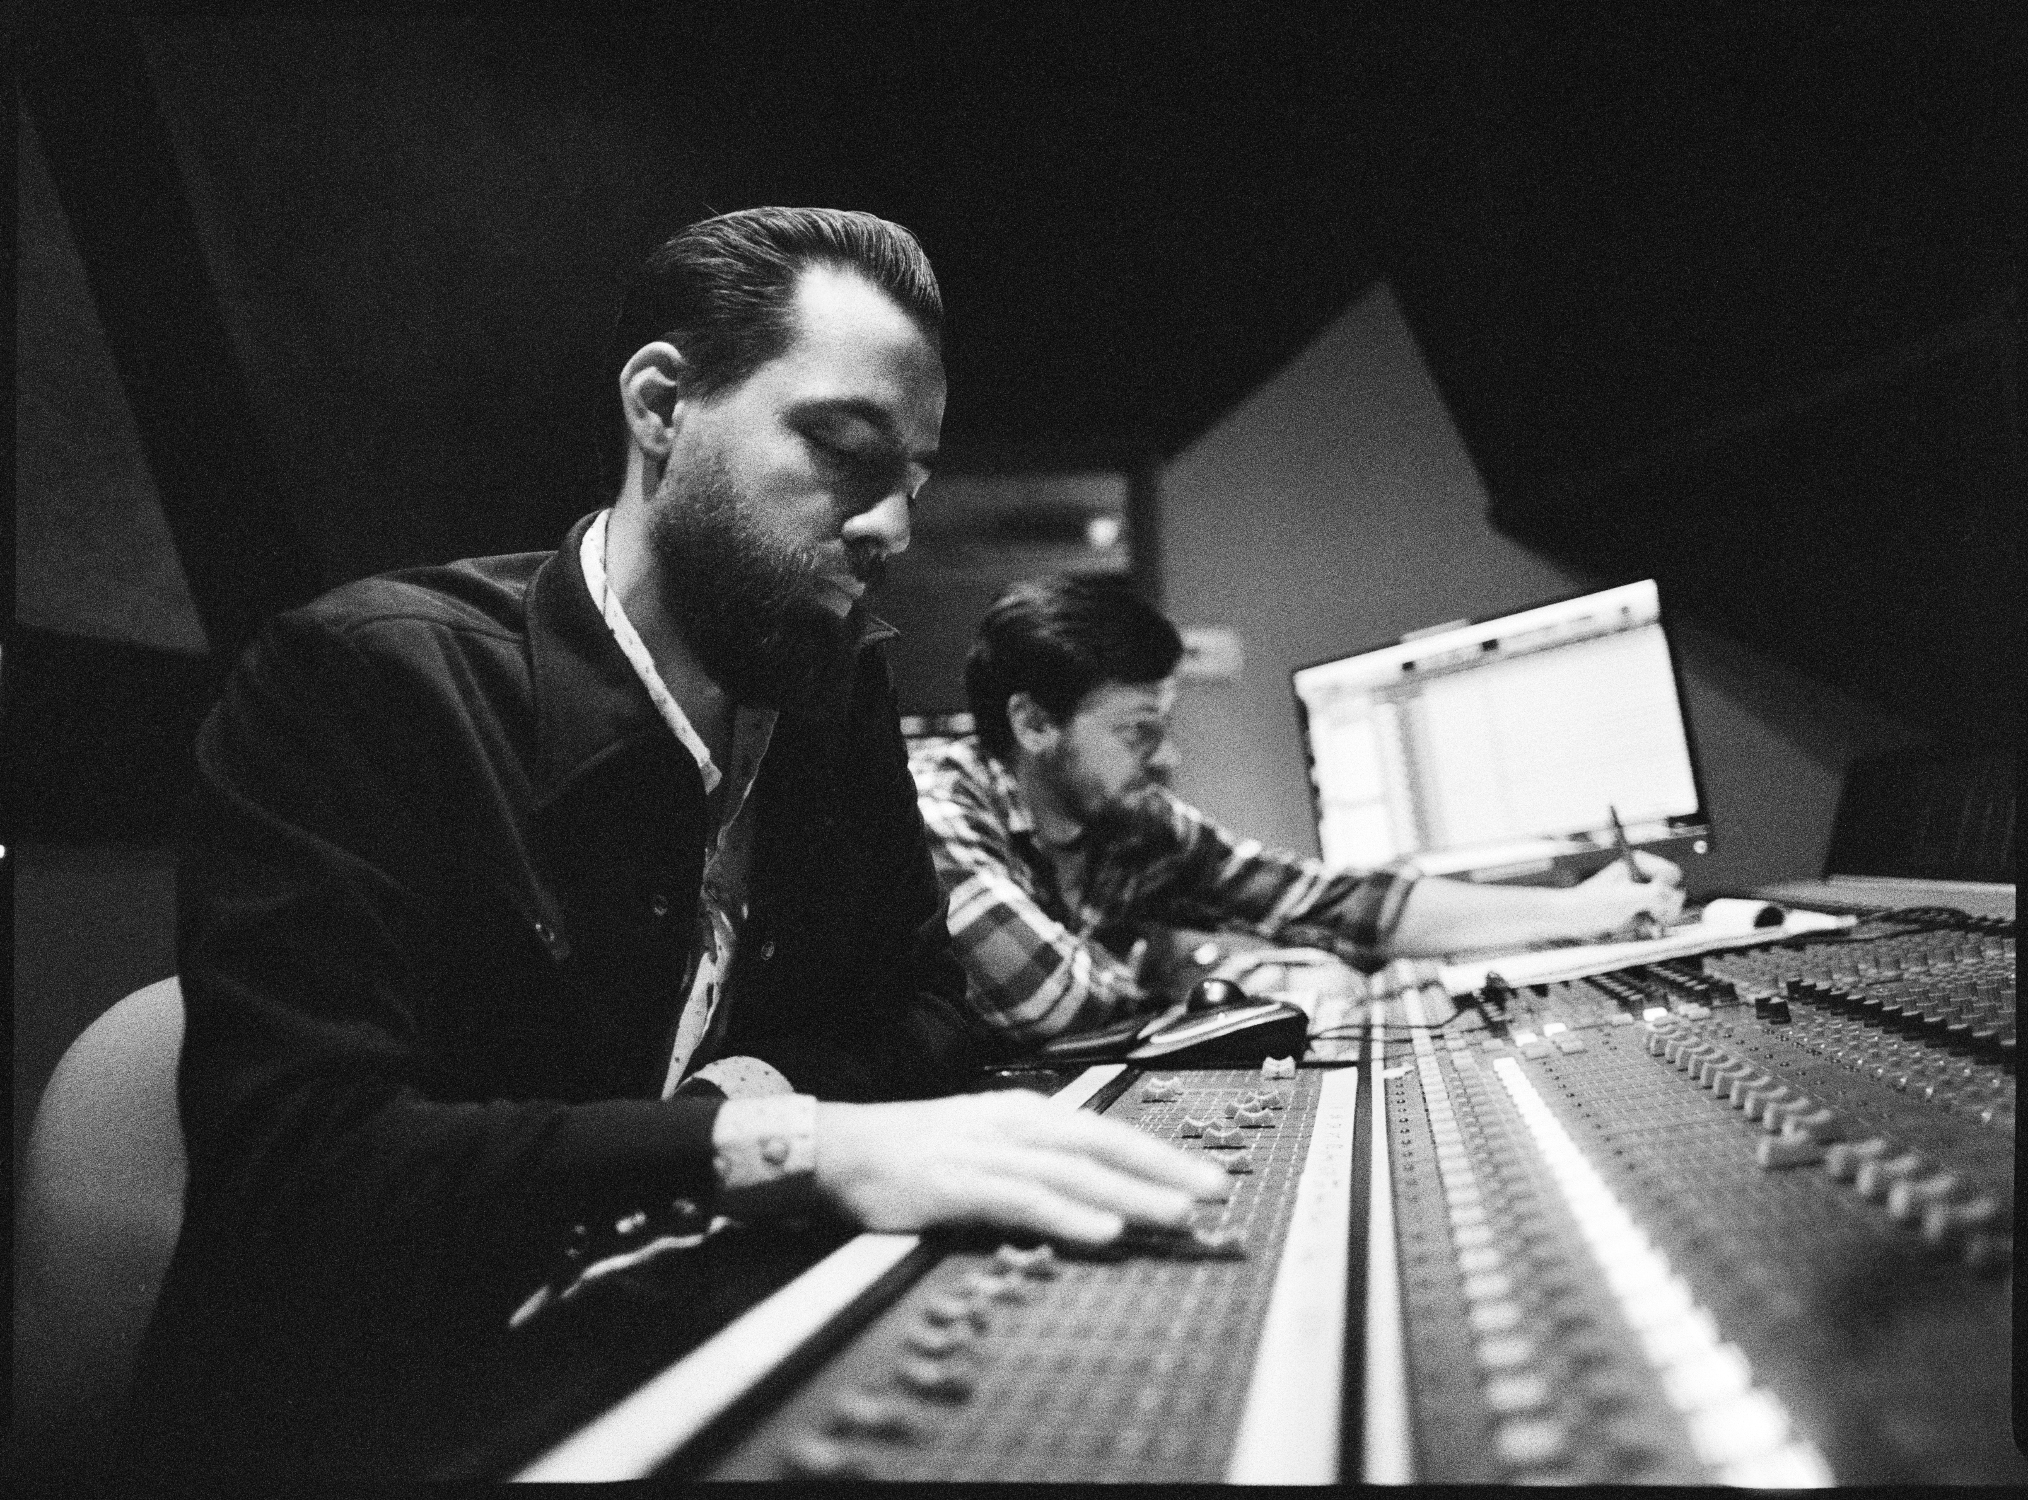 Producer Matt Ross-Spang adjusting levels in the control room of Sam Phillips Recording in Memphis, TN